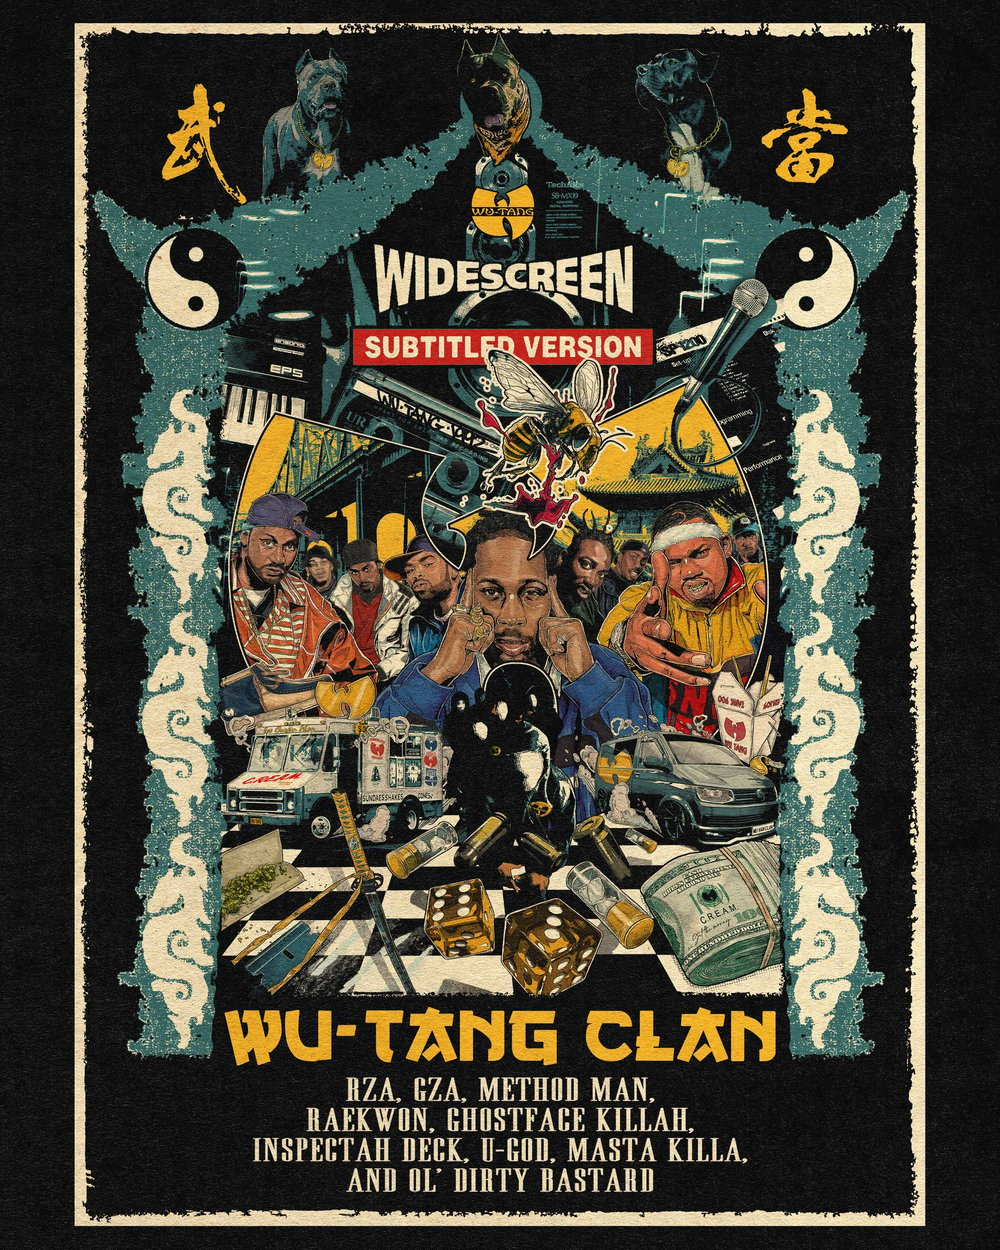 WU TANG IN WIDESCREEN (SUBTITLED VERSION)